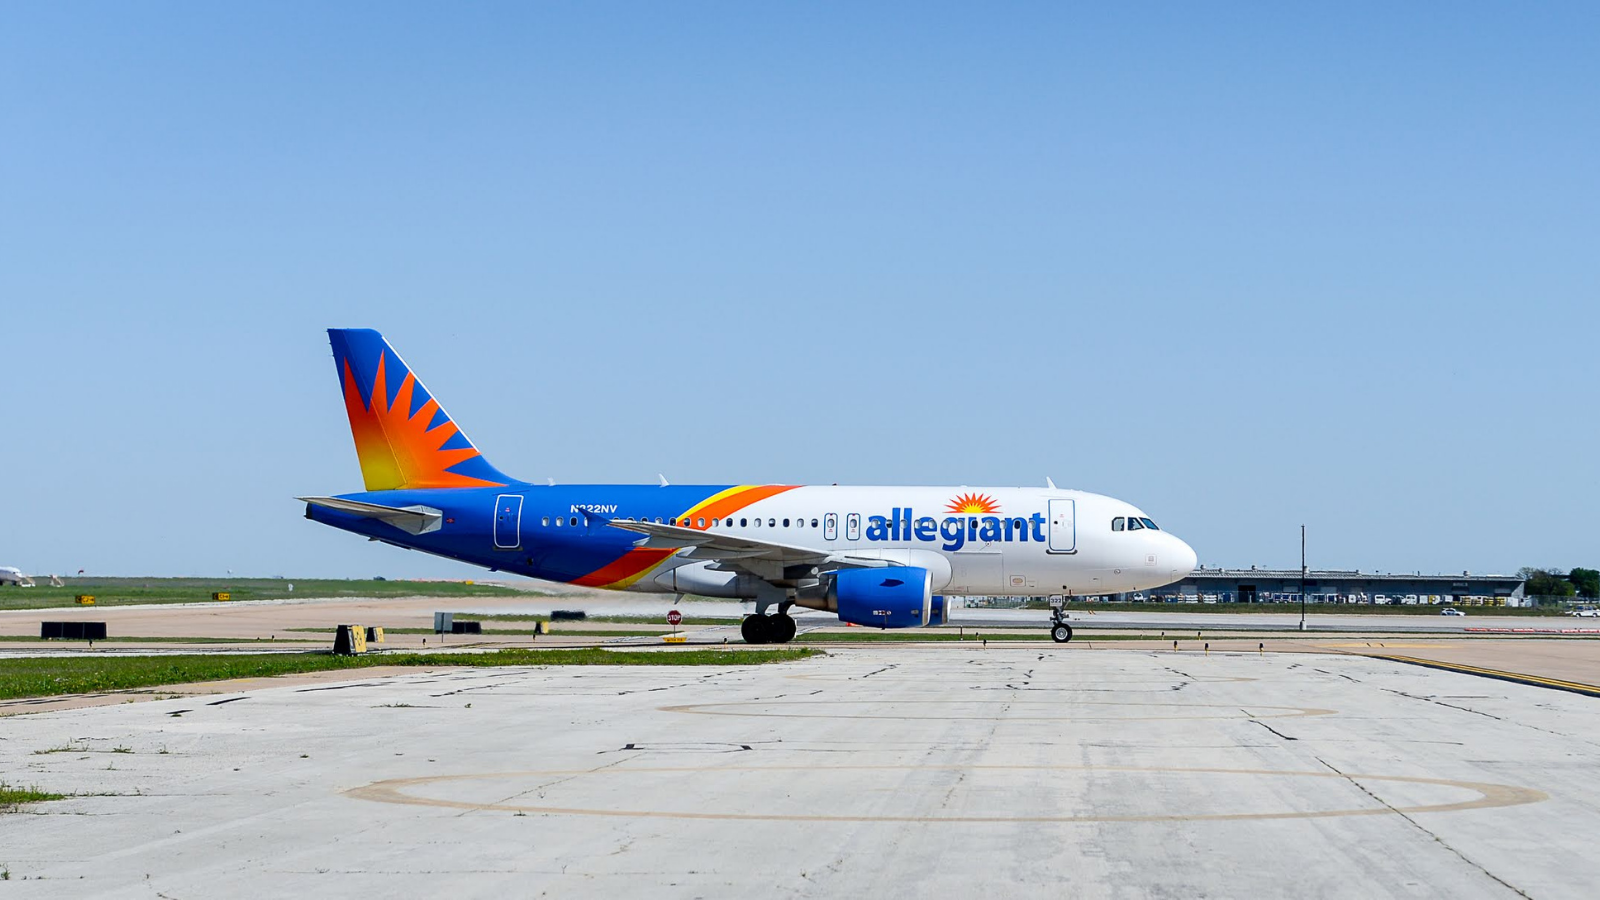 Photo of an Allegiant airplane on the AUS airfield